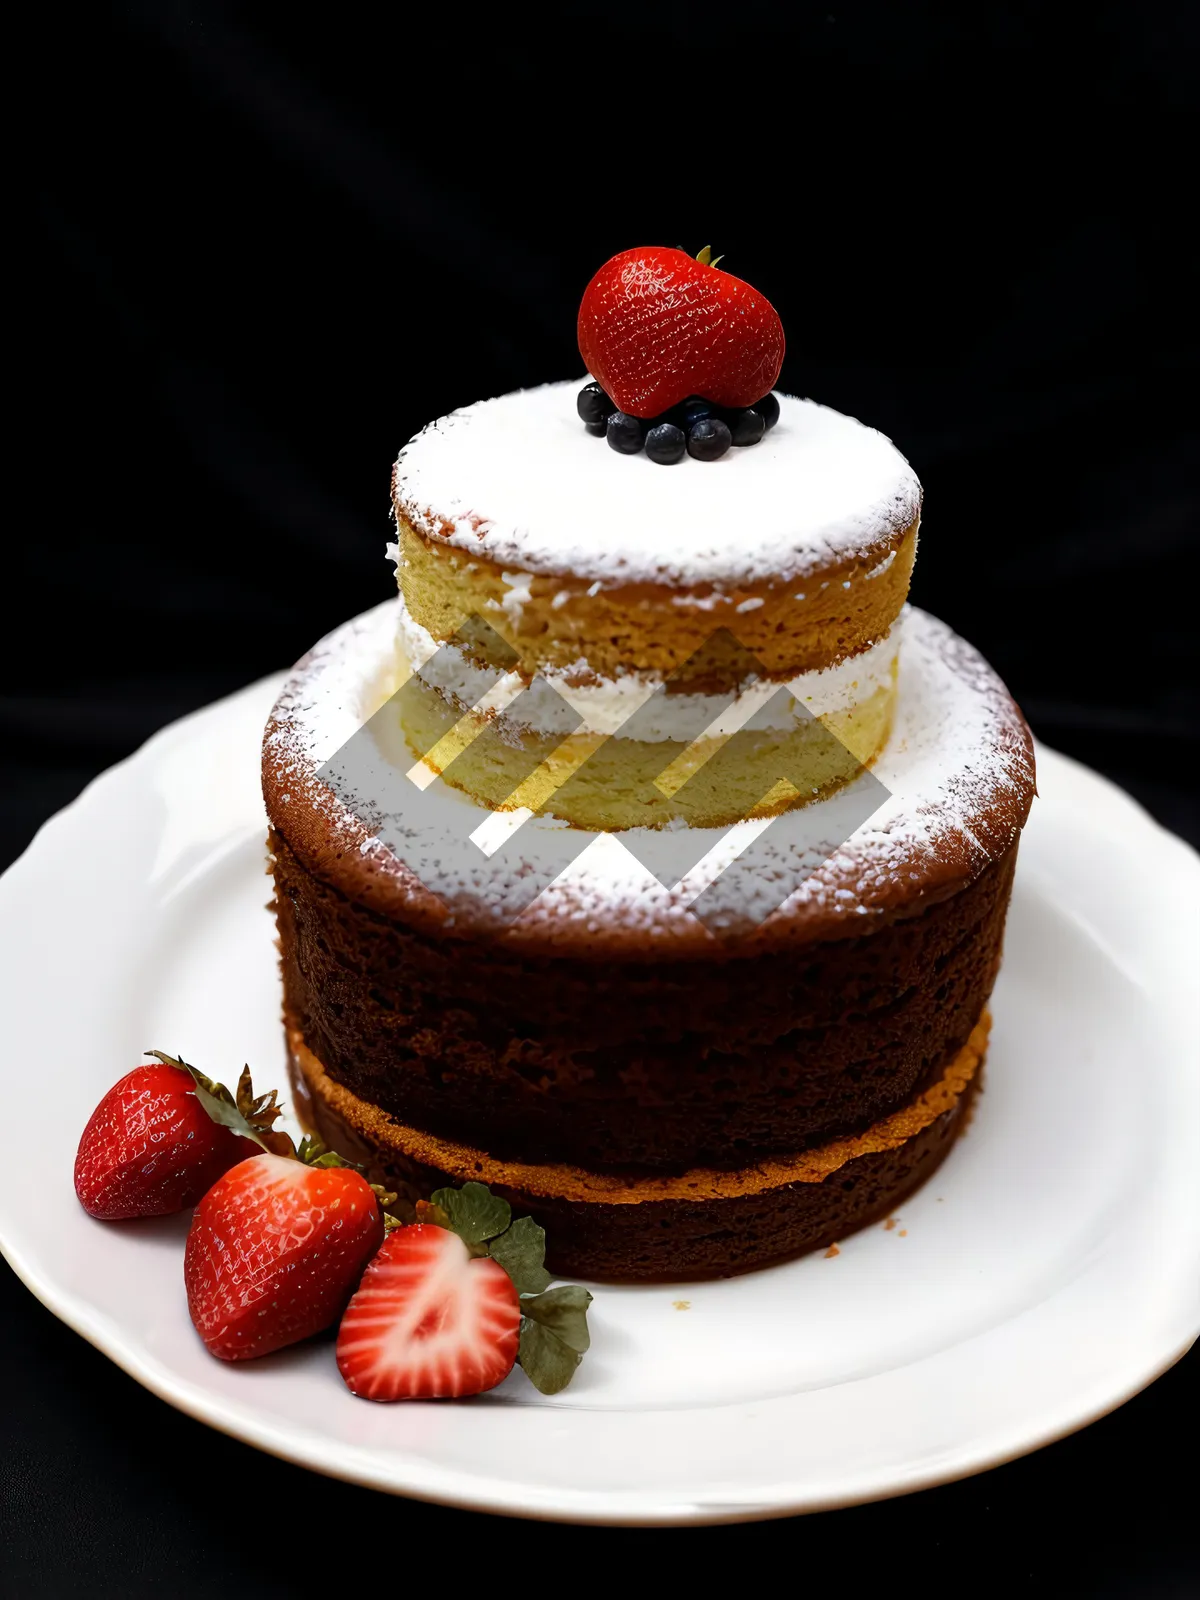 Picture of Delicious Berry Cake with Chocolate Sauce